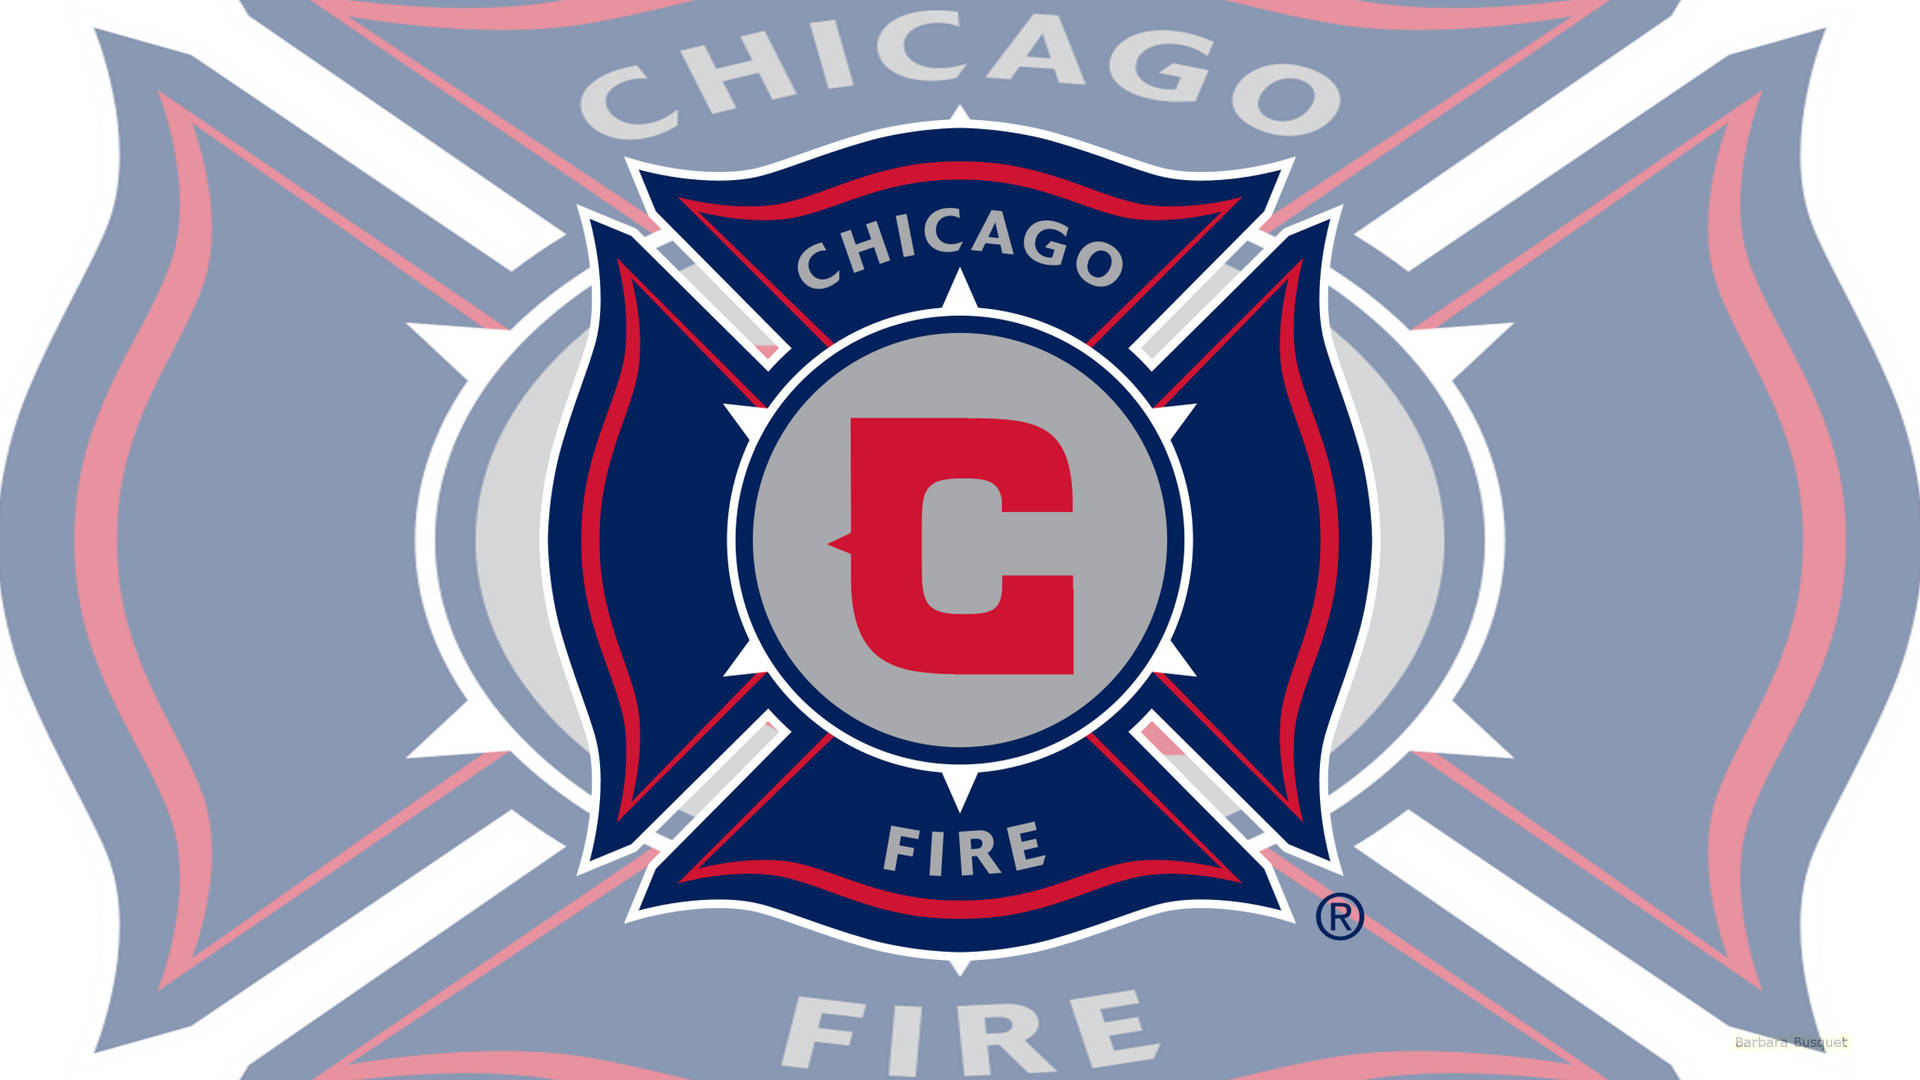 Fiery Passion Expressed - The Chicago Fire Soccer Club Logo Wallpaper